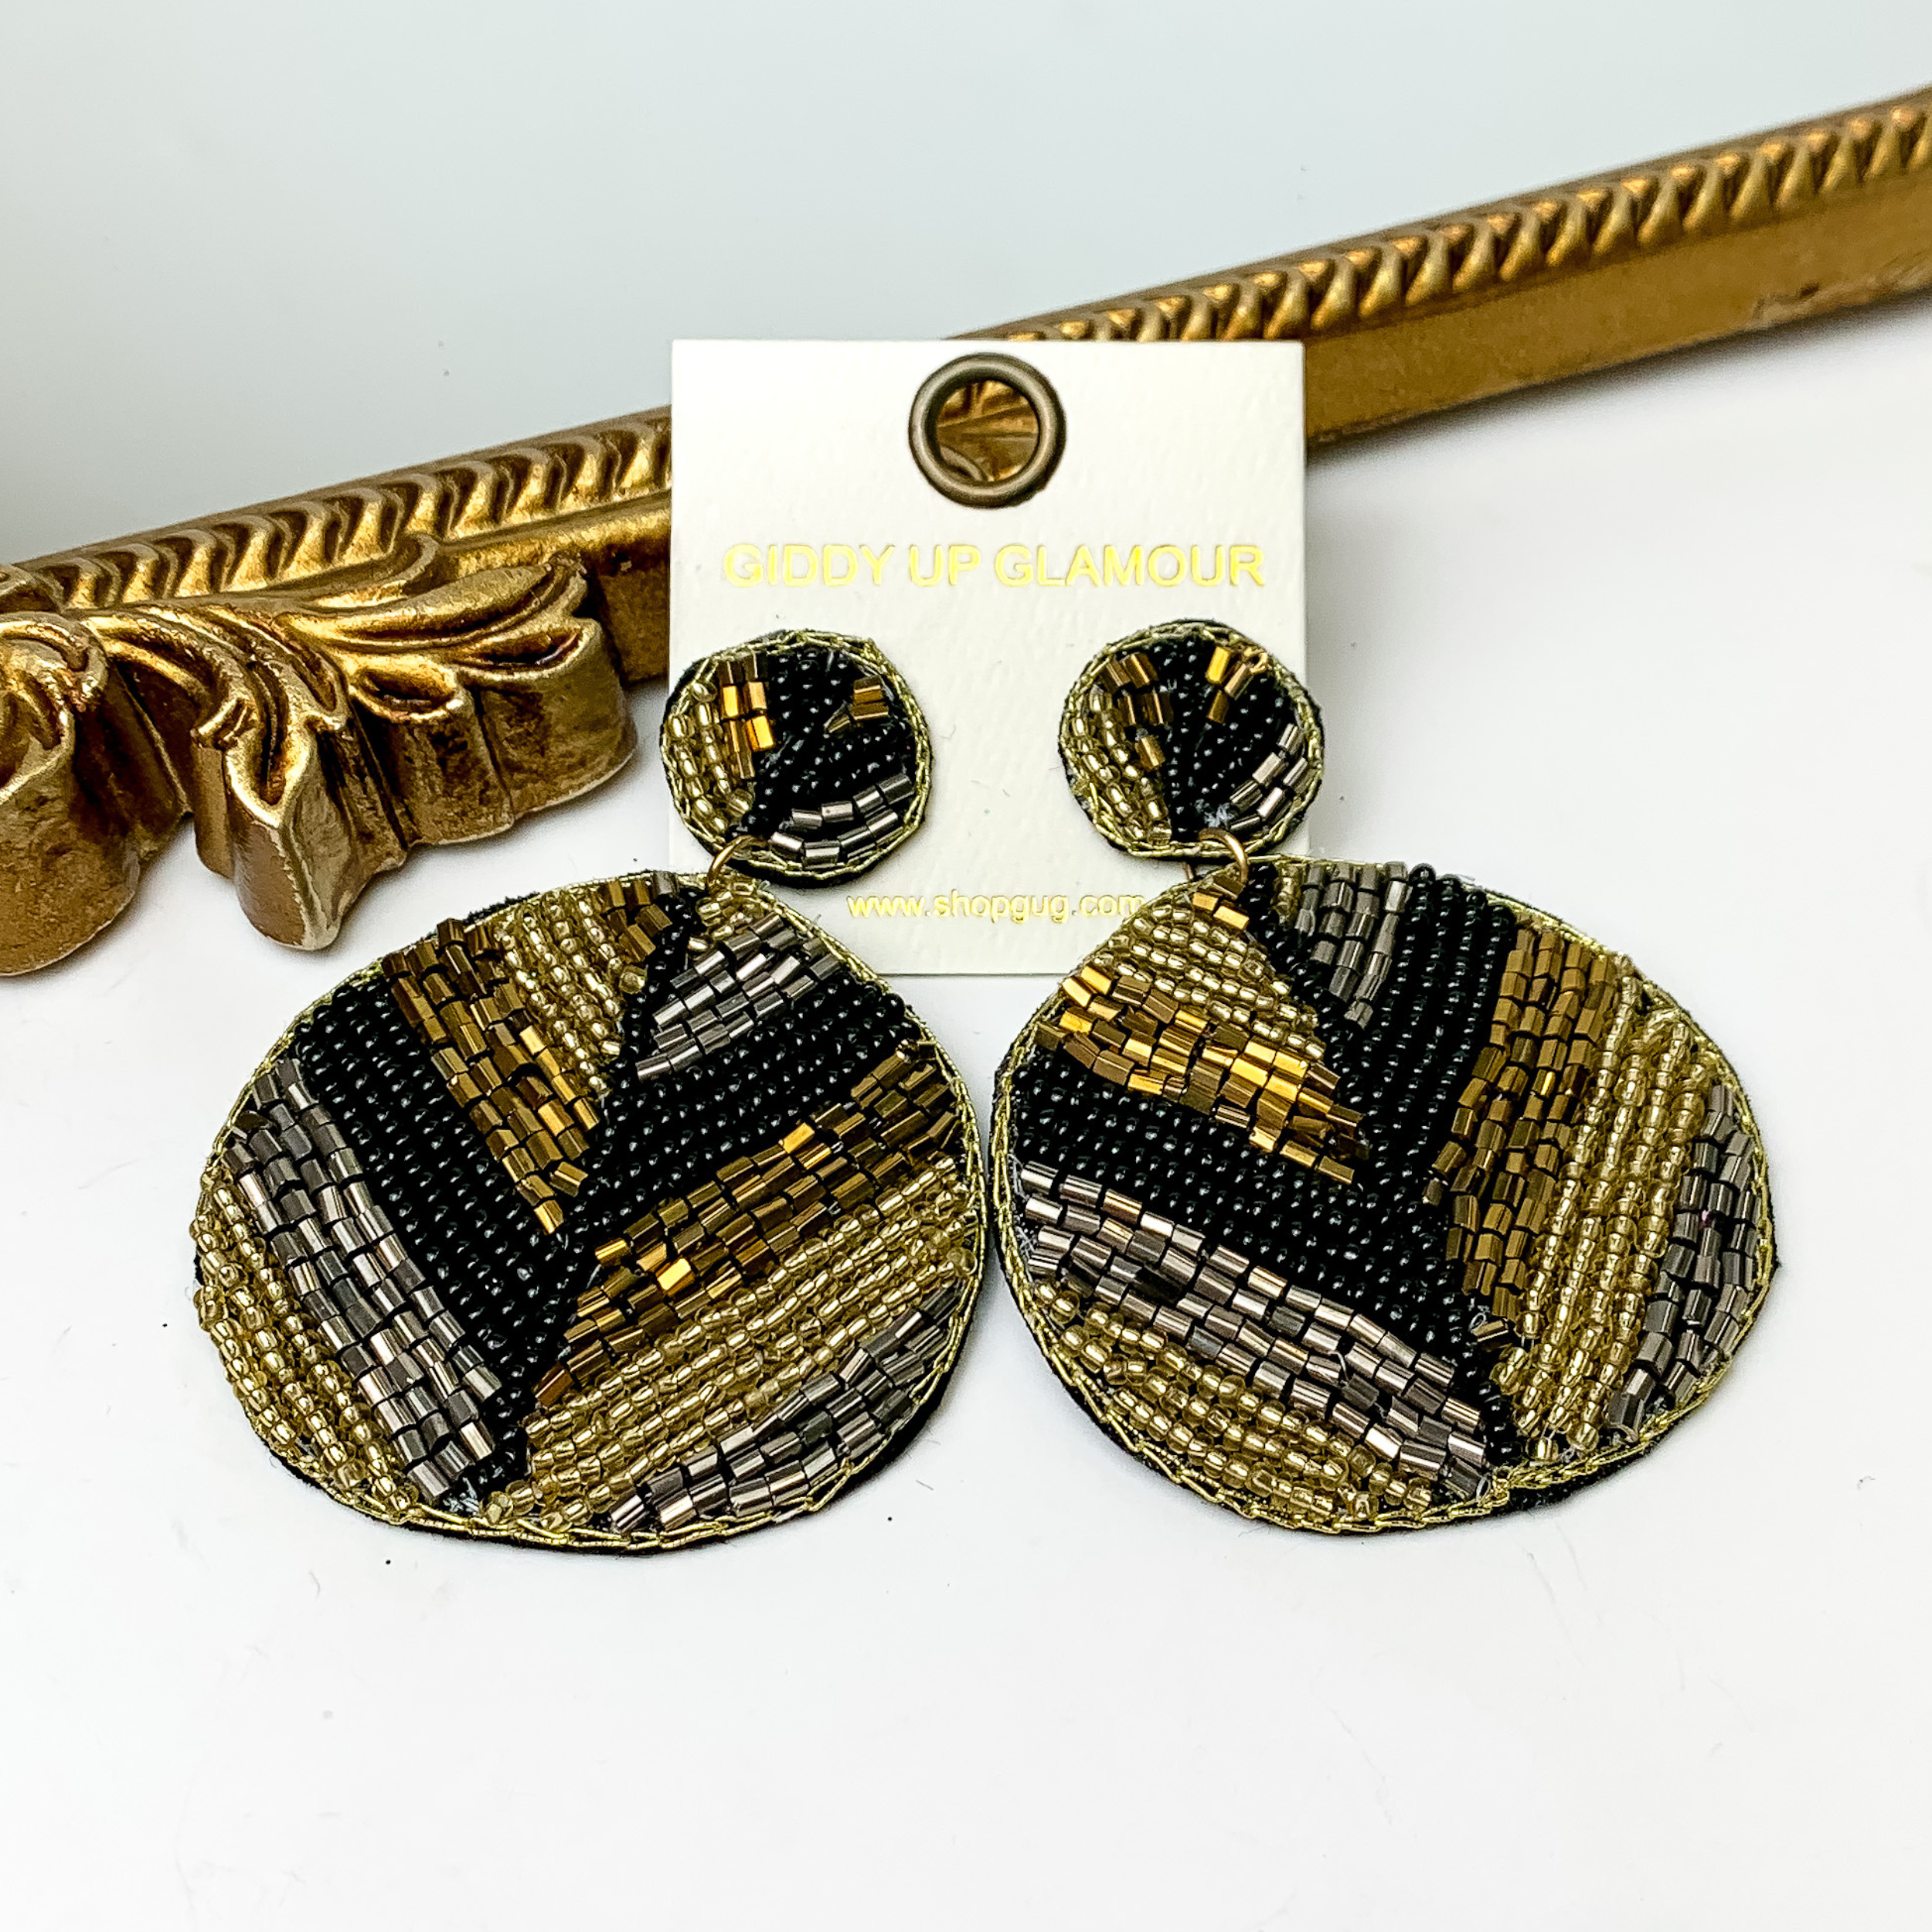 Pictured is a pair of beaded circle drop earrings in a V-shaped stripe pattern. These earrings include black, gold, bronze, and silver beads. These earrings are pictured in a white background with a gold mirror.